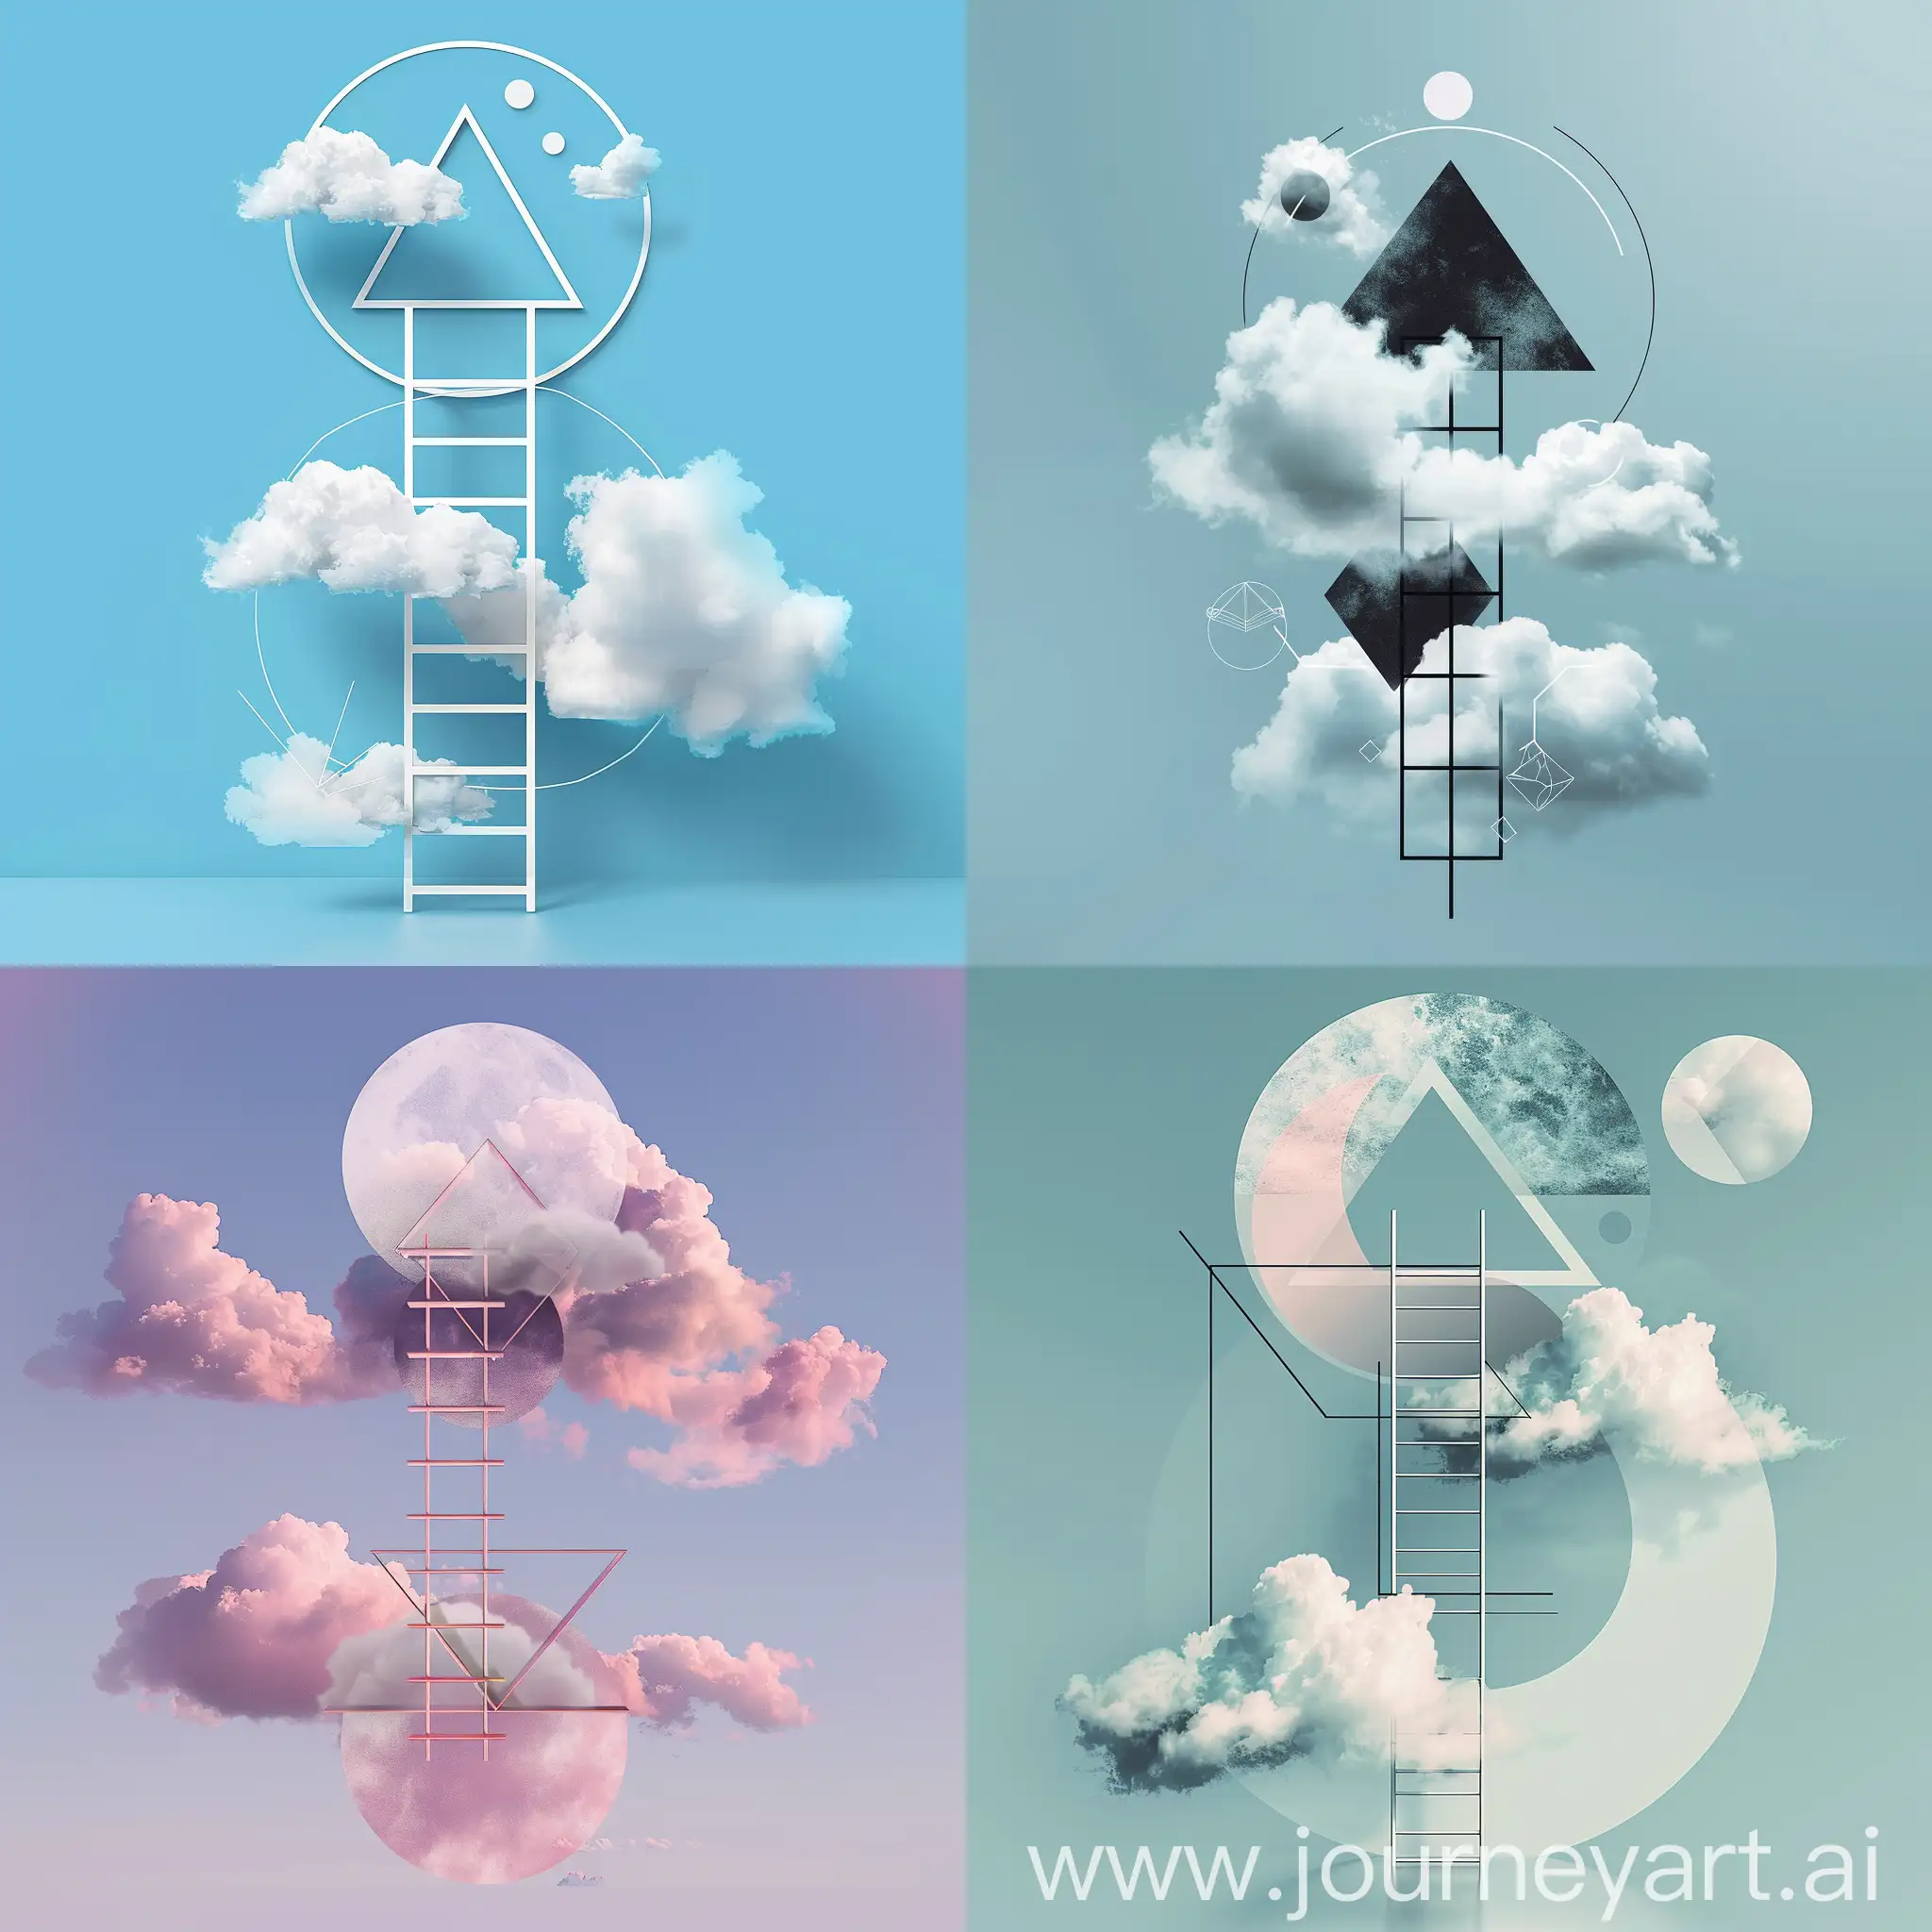 Geometric-Shapes-Ladder-Ascending-through-Clouds